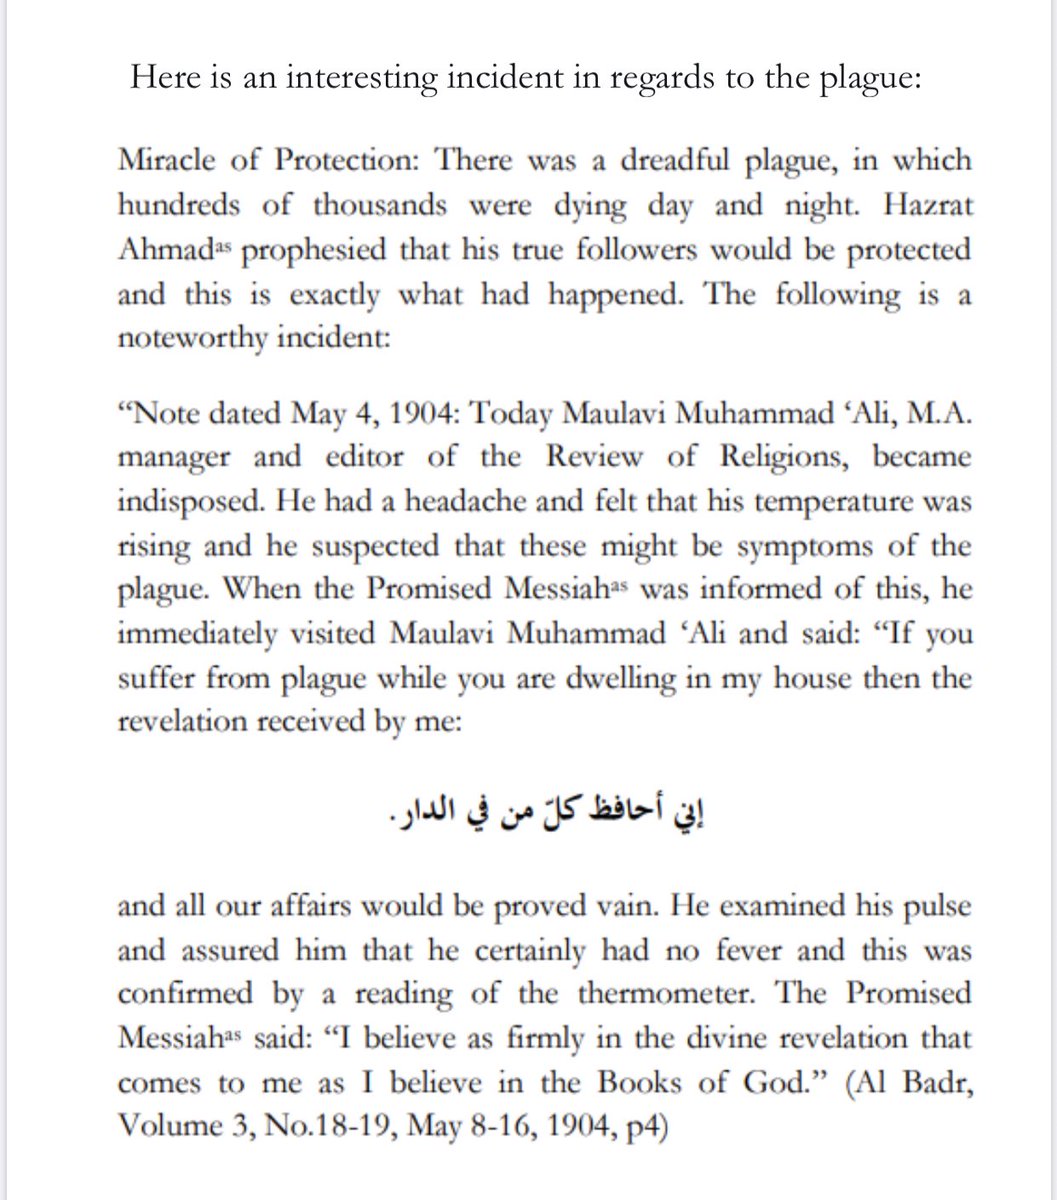 The next allegation was that Hadhrat Ahmad عَلَيْهِ ٱلسَّلَامُ prophesied that the plague would not enter his house and it did, God Forbid. The critic has once again lied. Below are his allegations answered. He copy pasted lies. Such references don’t exist anywhere!